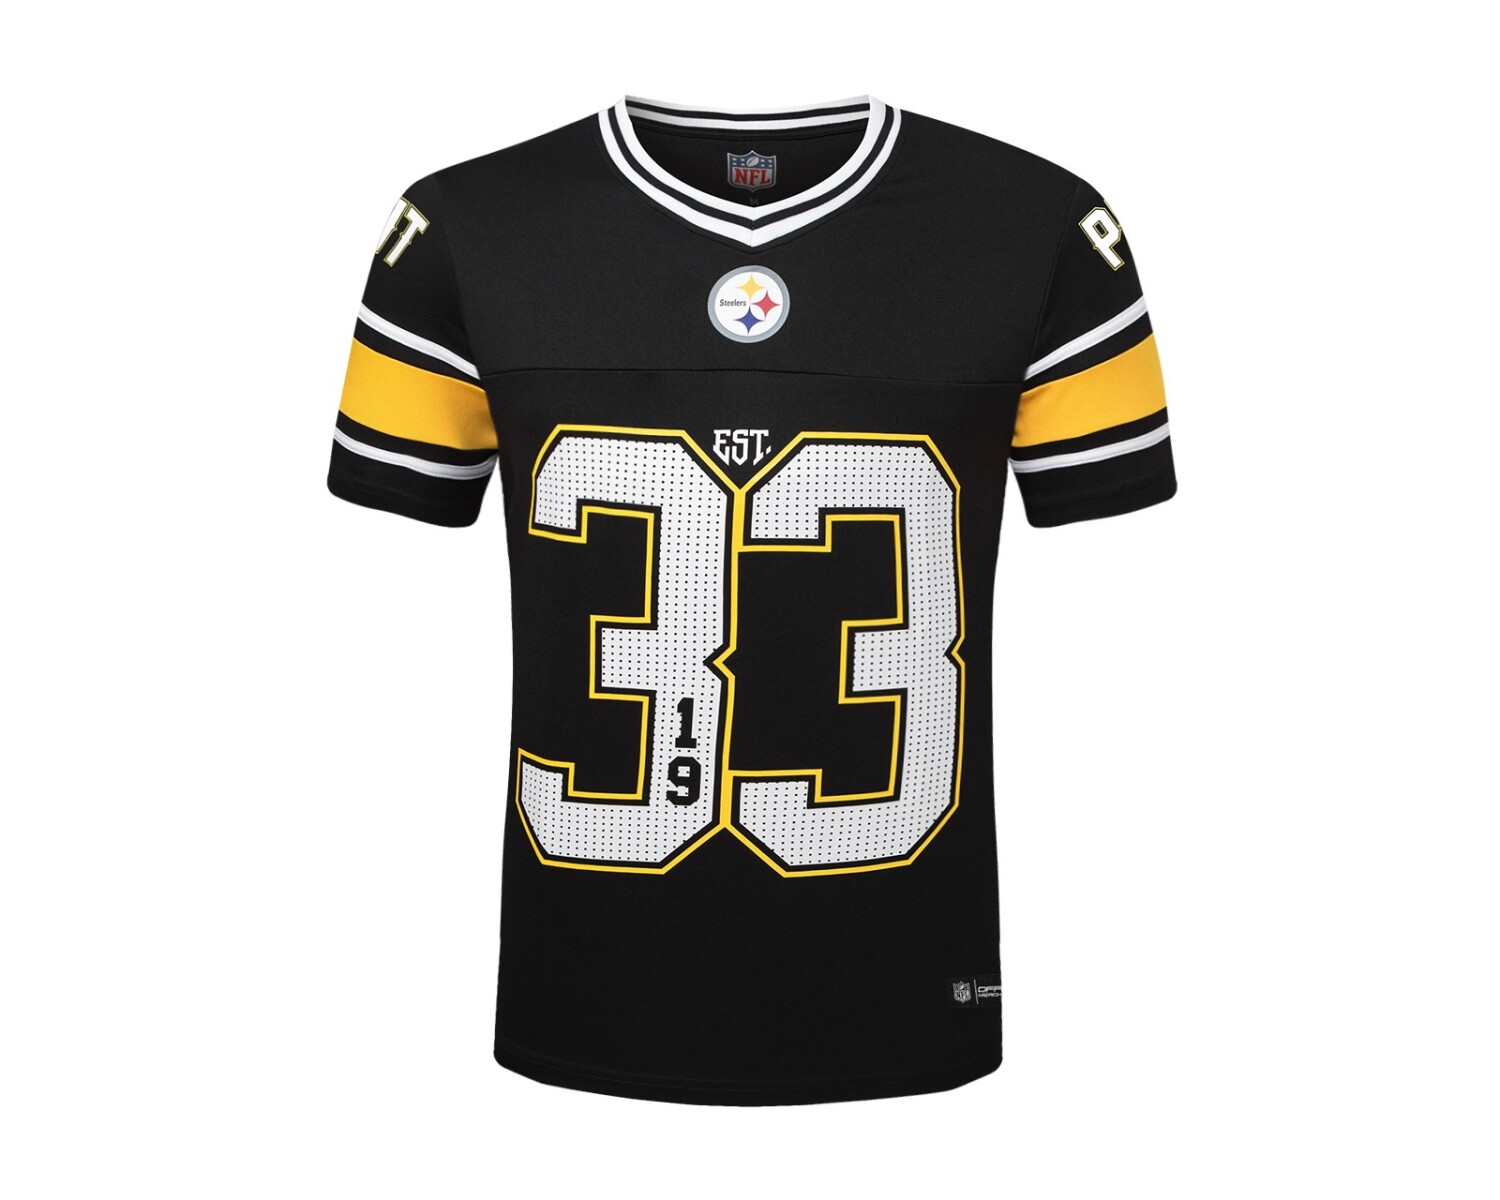 Remera NFL Entrenamiento Game Jersey Steelers - S/C 